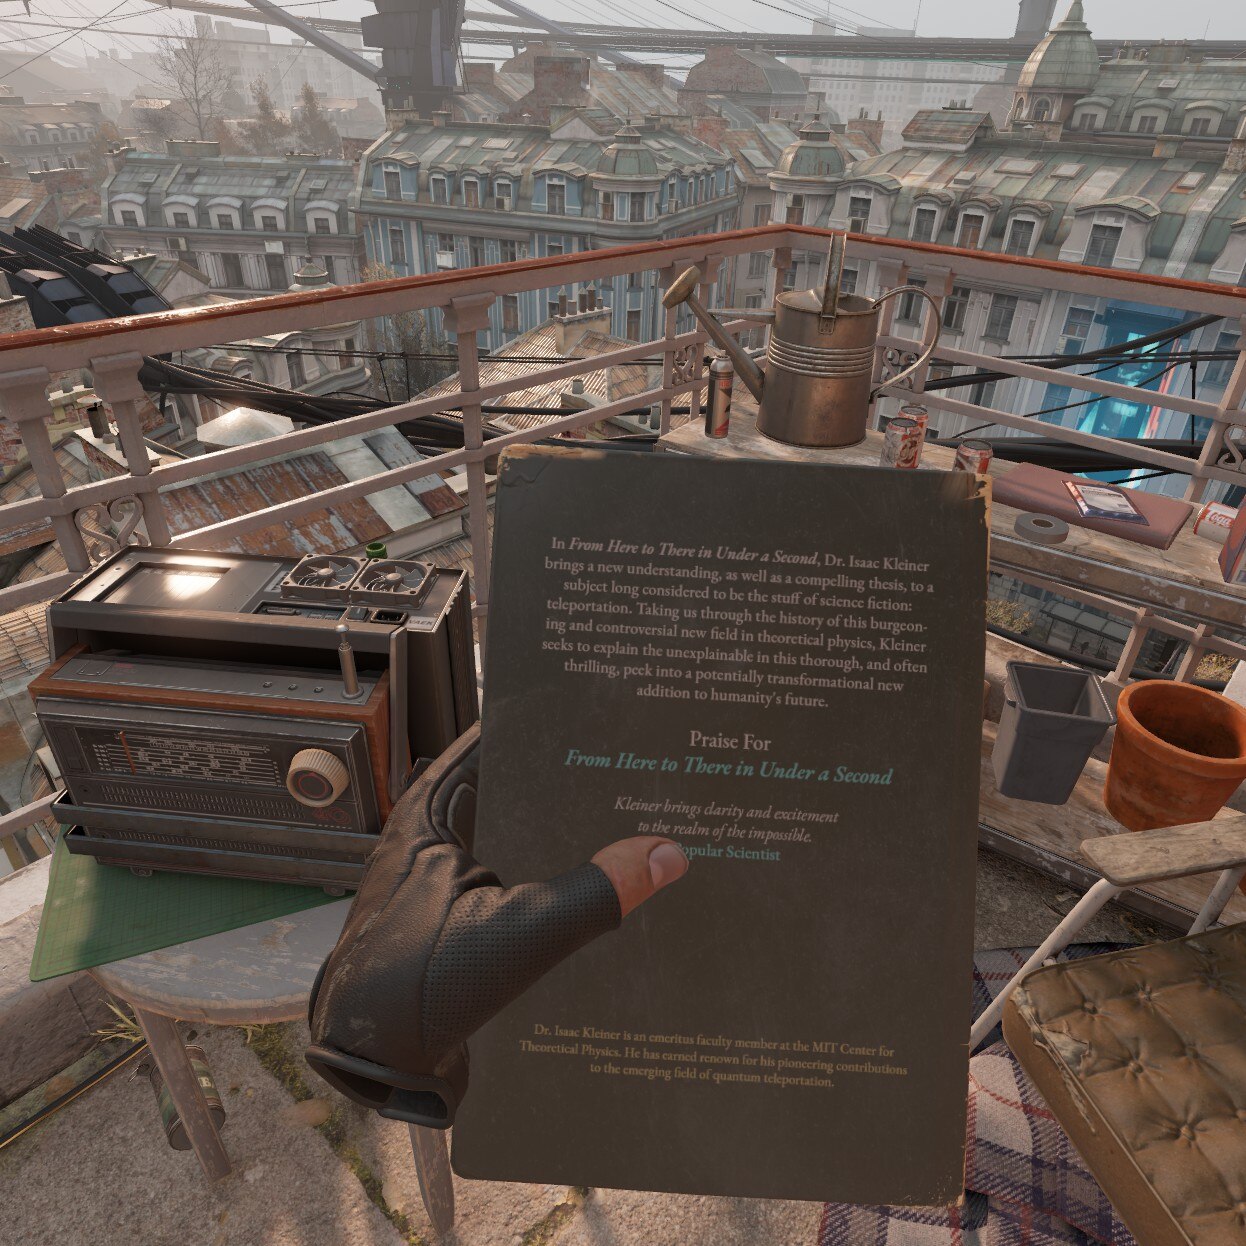 Alyx examining a book in the starting location